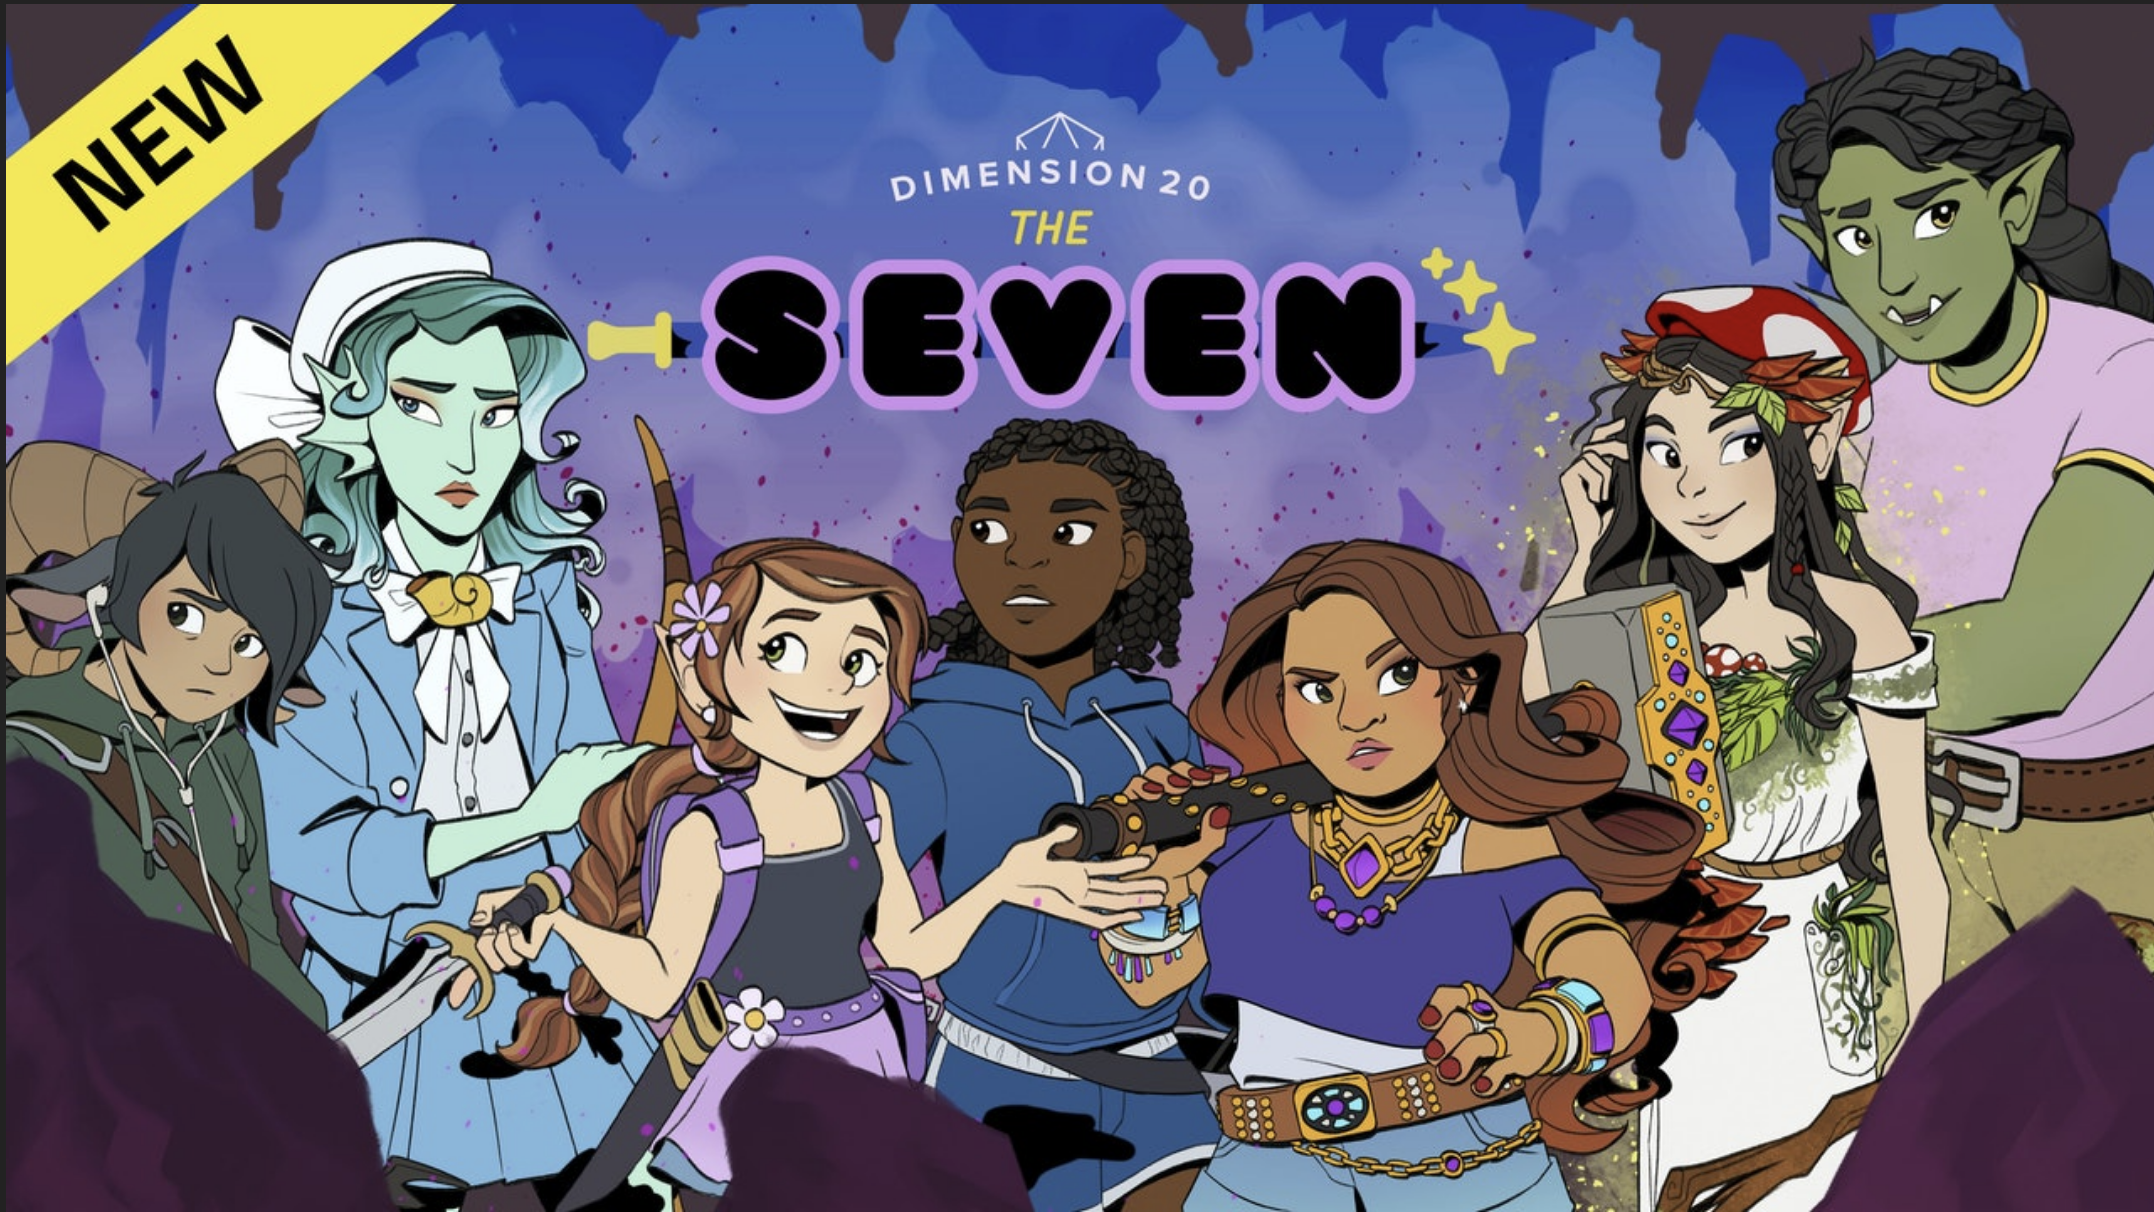 Dimension 20's The Seven, featuring your humble Dungeon Master Brennan Lee Mulligan (also playing Zelda Donovan).